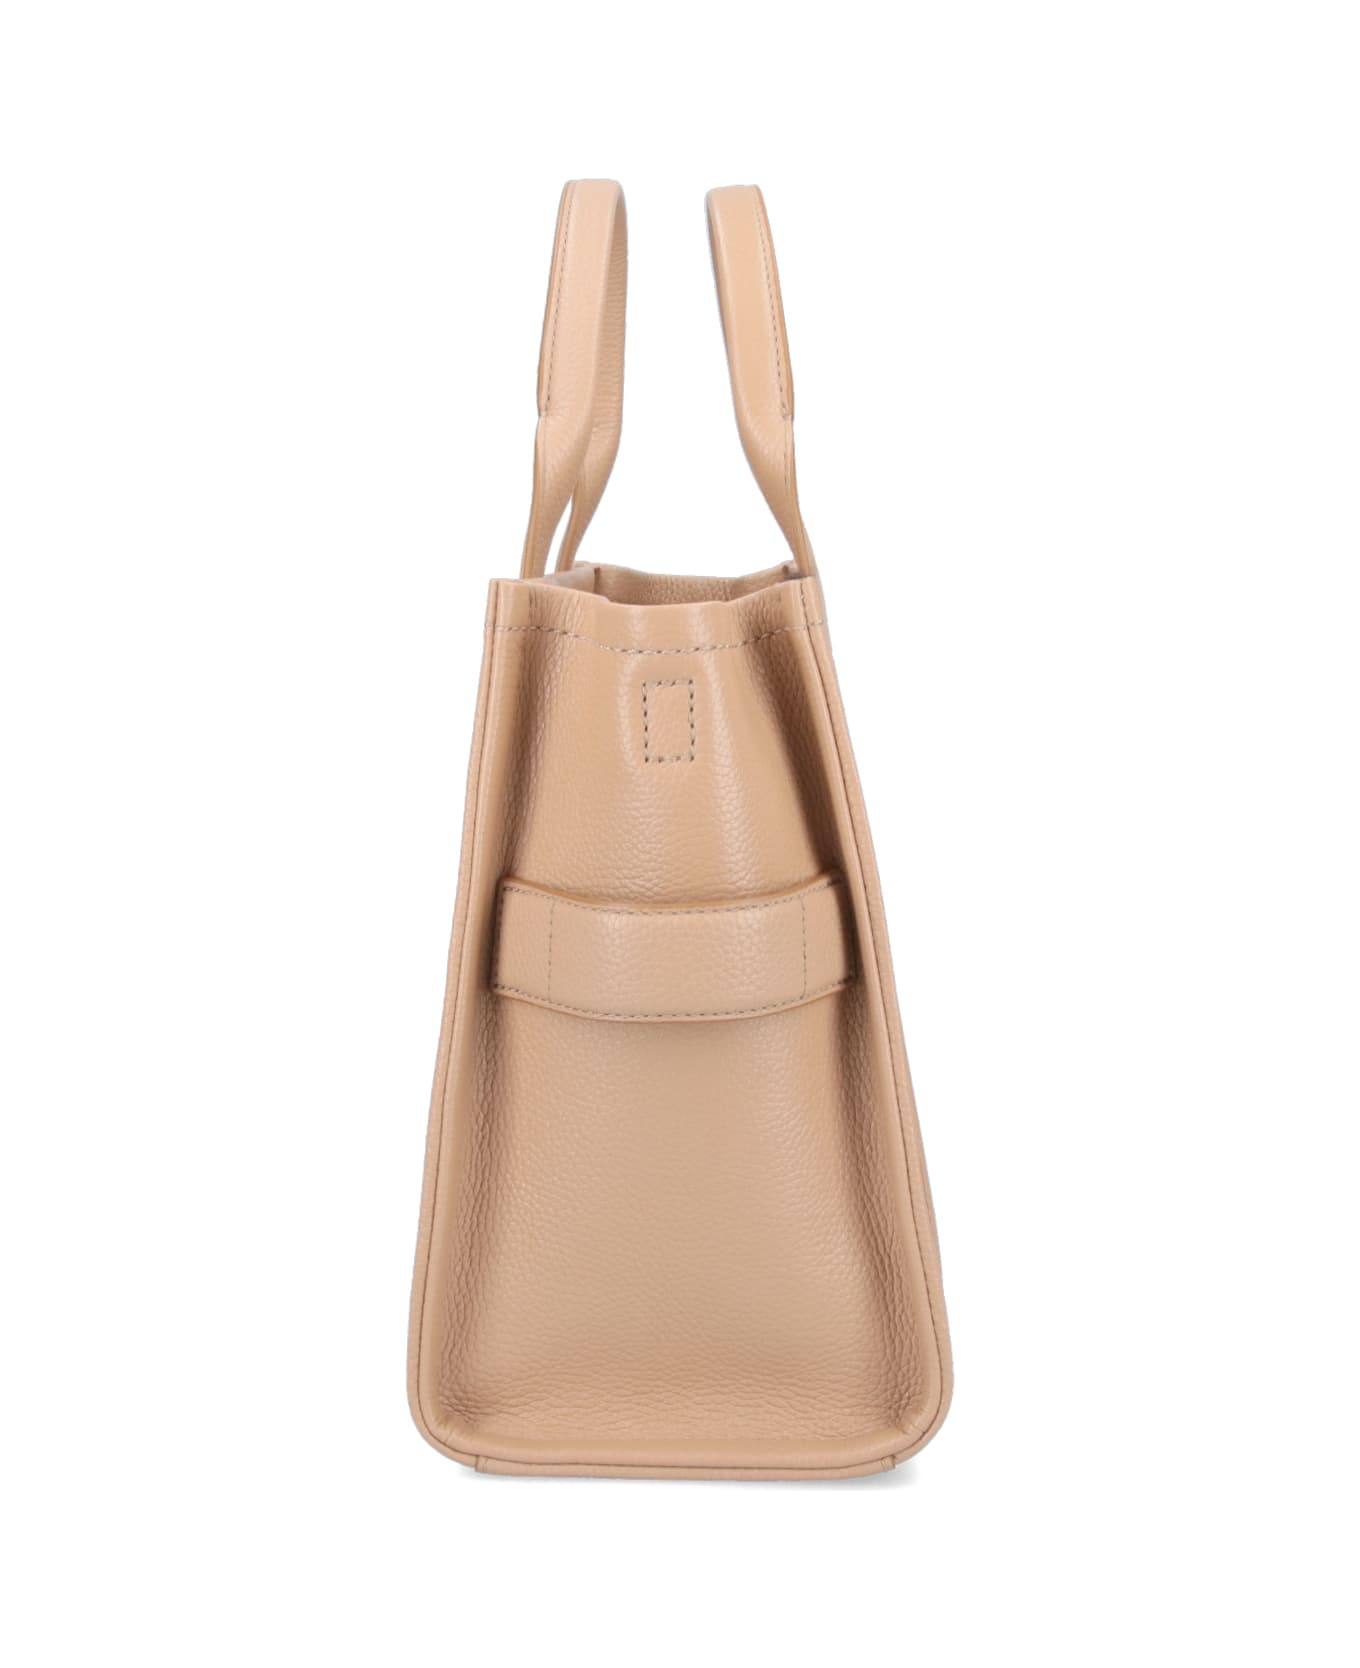 Marc Jacobs The Leather Medium Tote Bag - Camel トートバッグ